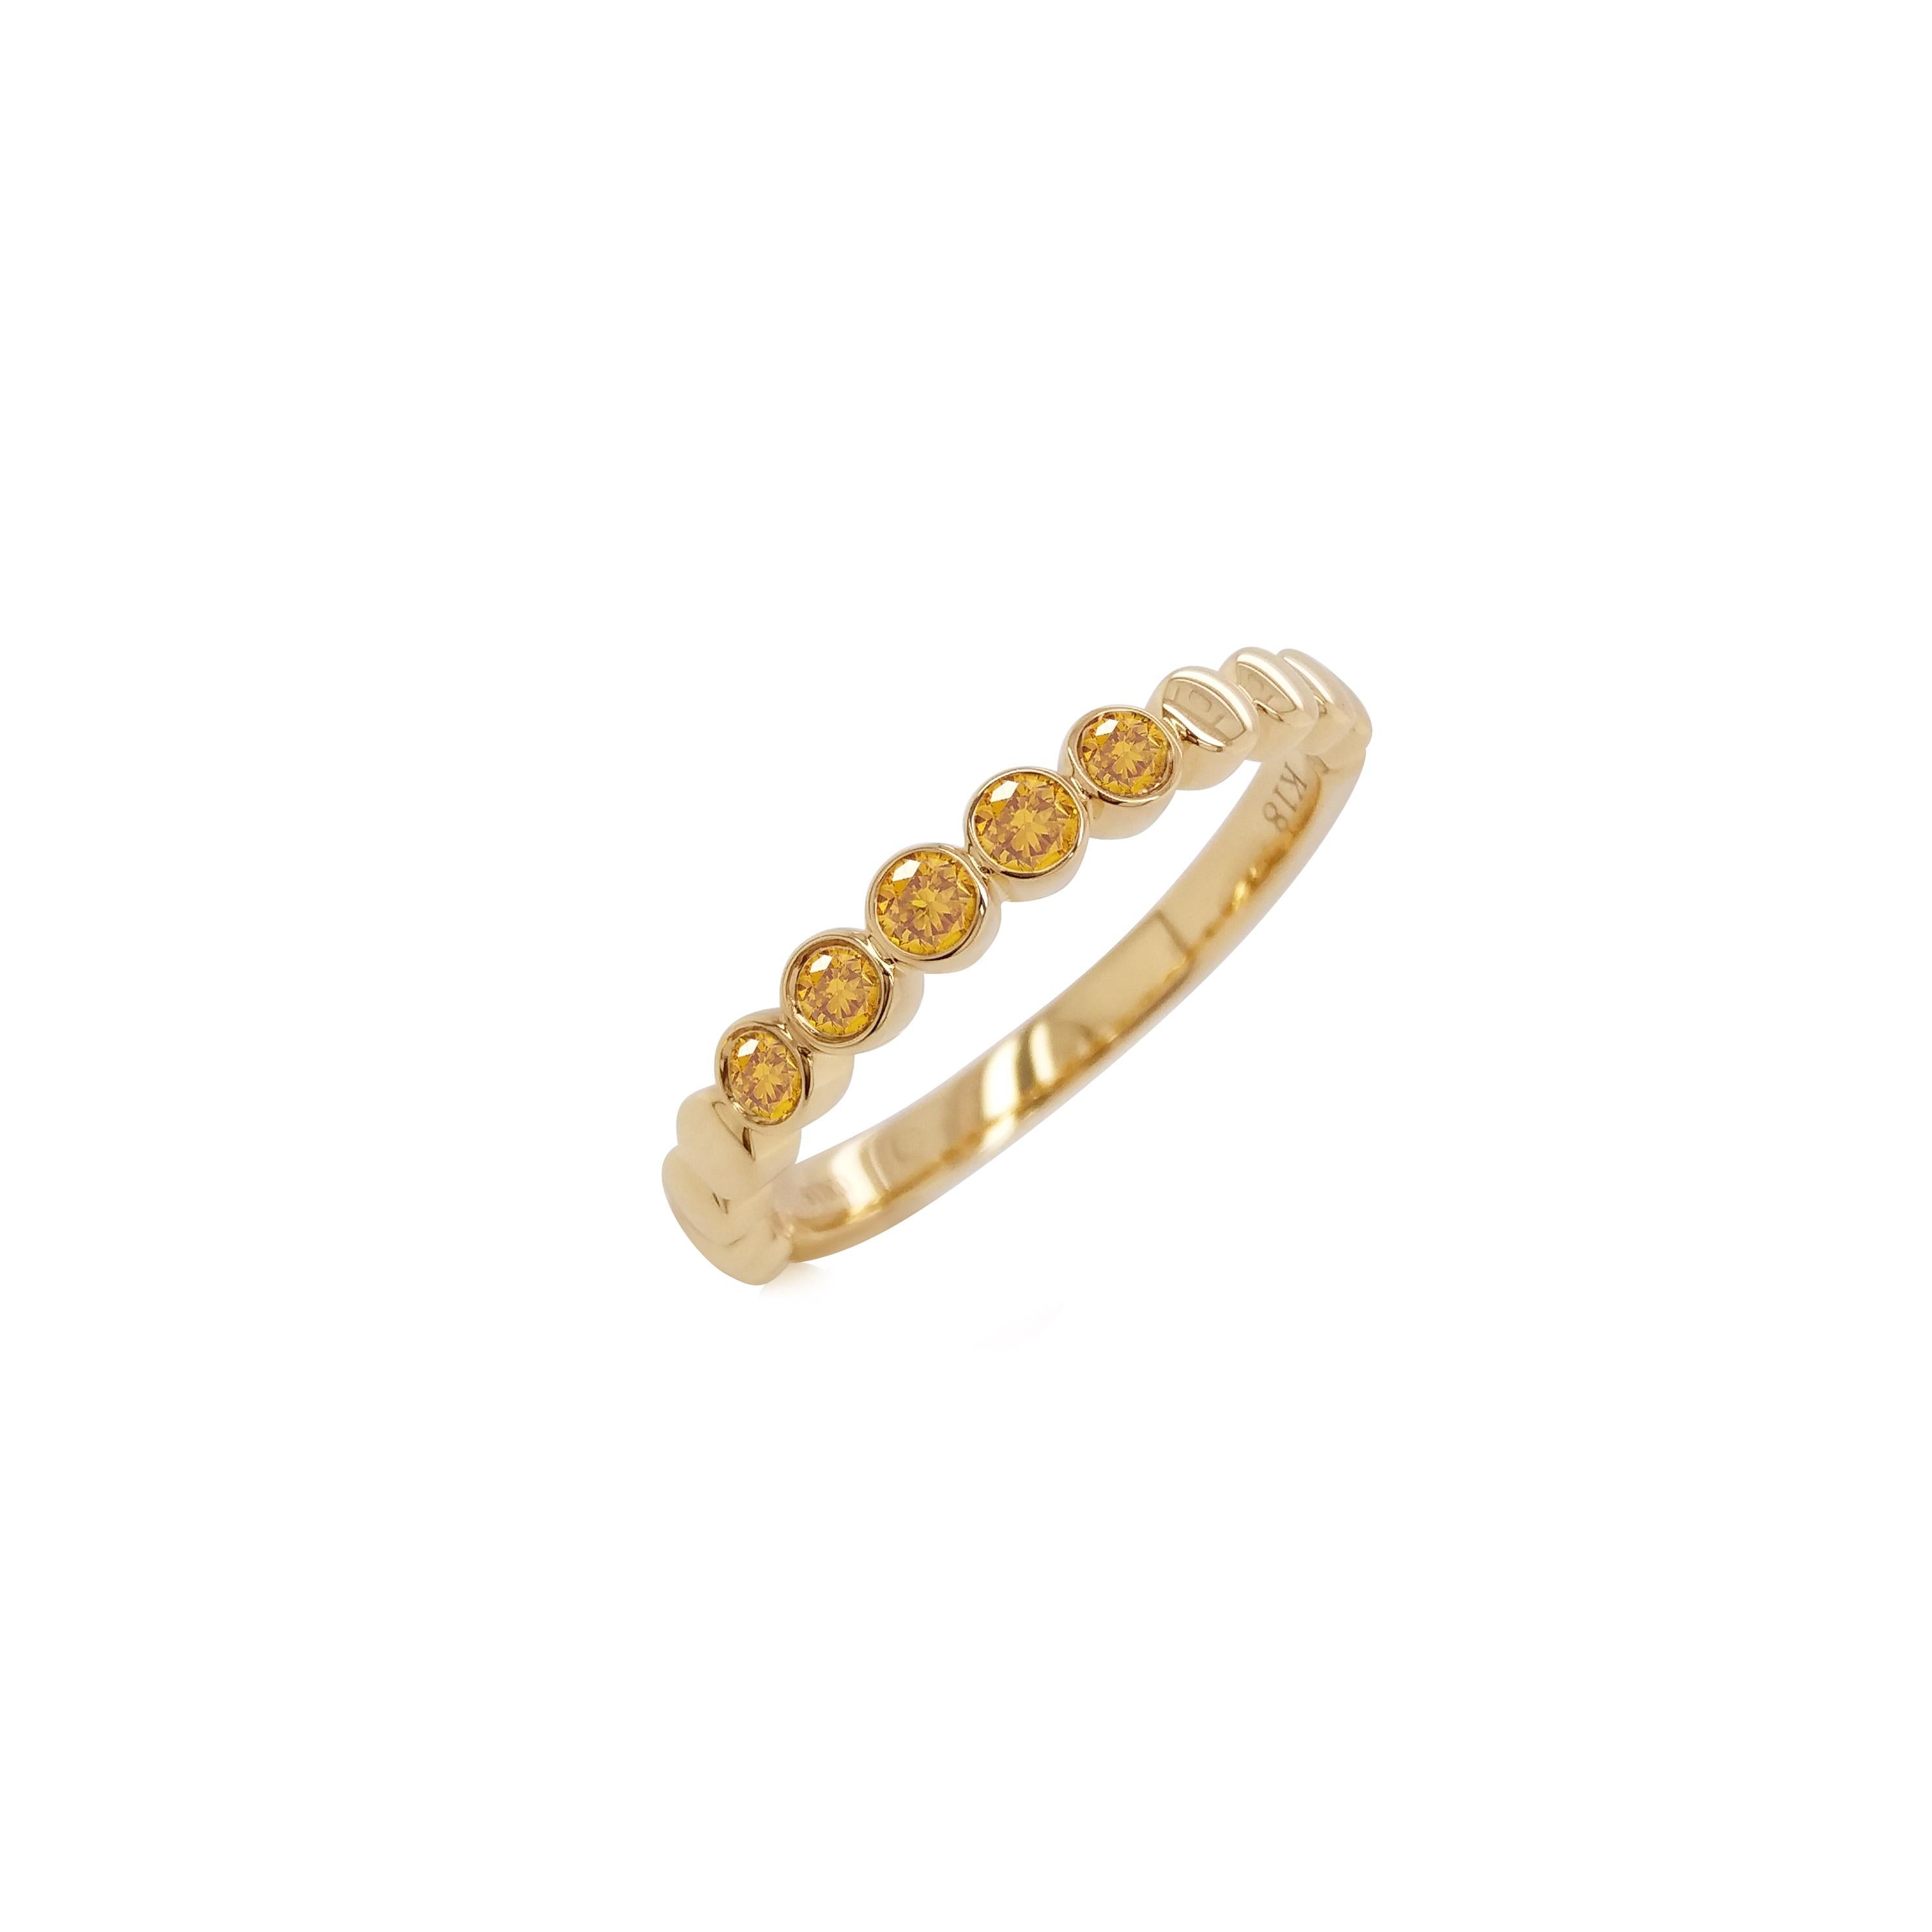 Round Cut Rare Brilliant-Cut Yellow Diamond Band Ring made in 18K Gold For Sale